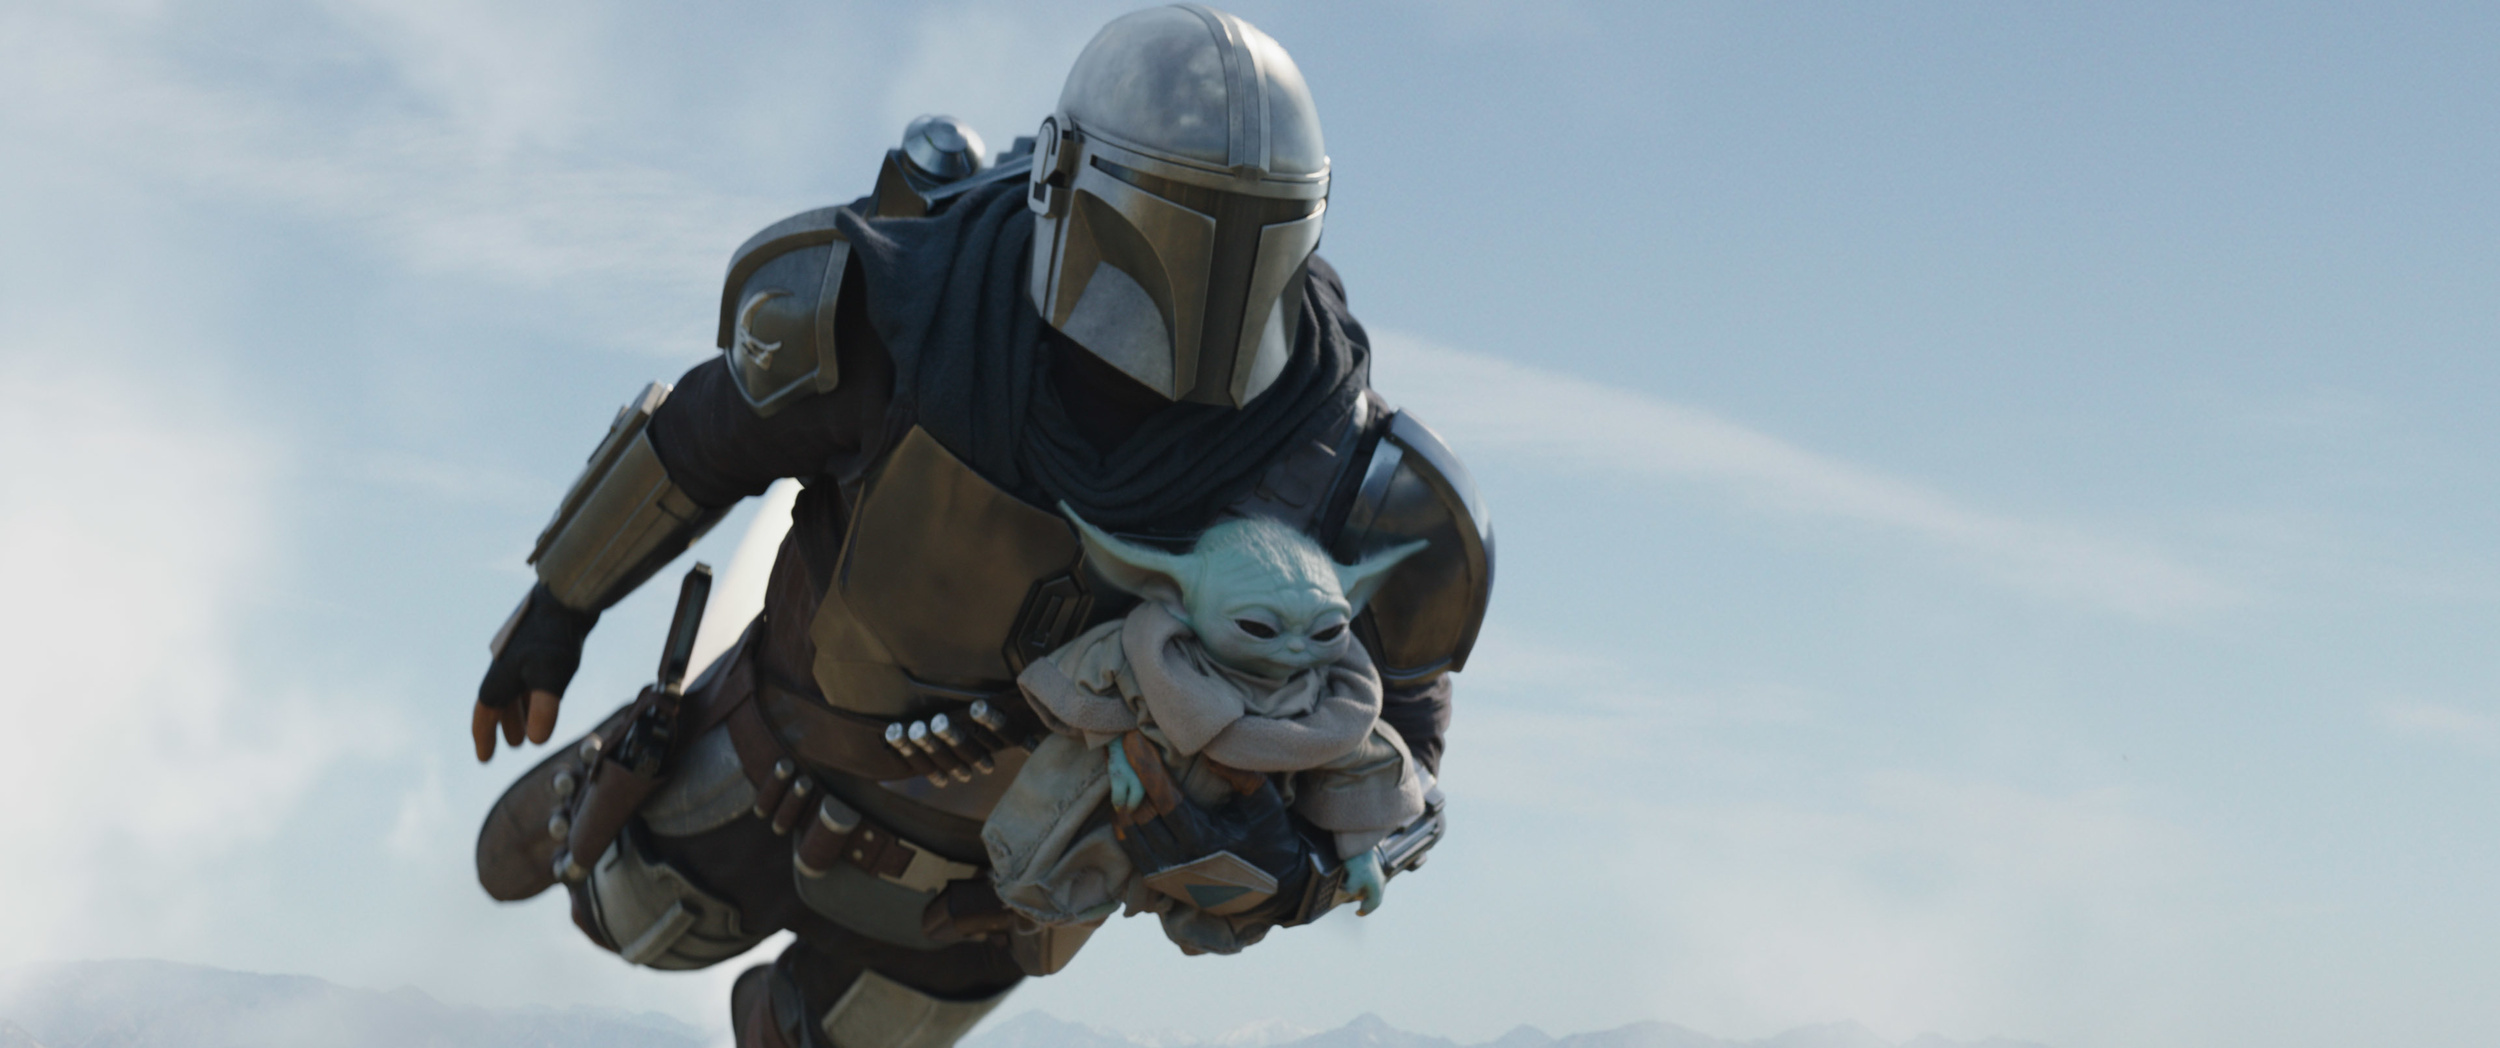 <p>Few franchises are as venerable or as popular as <span><em>Star Wars</em>, </span>and <span><em>The Mandalorian</em></span> demonstrated that it was more than capable of leaping television. Focusing on the title character — played by Pedro Pascal — it follows his efforts to keep the tiny being known as Grogu safe from those who would use him for their own evil schemes. Part western, part space opera, and part buddy movie, there’s something for everyone in <span><em>The Mandalorian</em></span>. While its second and third seasons moved away from the popular episodic nature of the first season, there’s always a unique pleasure in seeing these two beloved characters share their adventures.  </p><p><a href='https://www.msn.com/en-us/community/channel/vid-cj9pqbr0vn9in2b6ddcd8sfgpfq6x6utp44fssrv6mc2gtybw0us'>Follow us on MSN to see more of our exclusive entertainment content.</a></p>